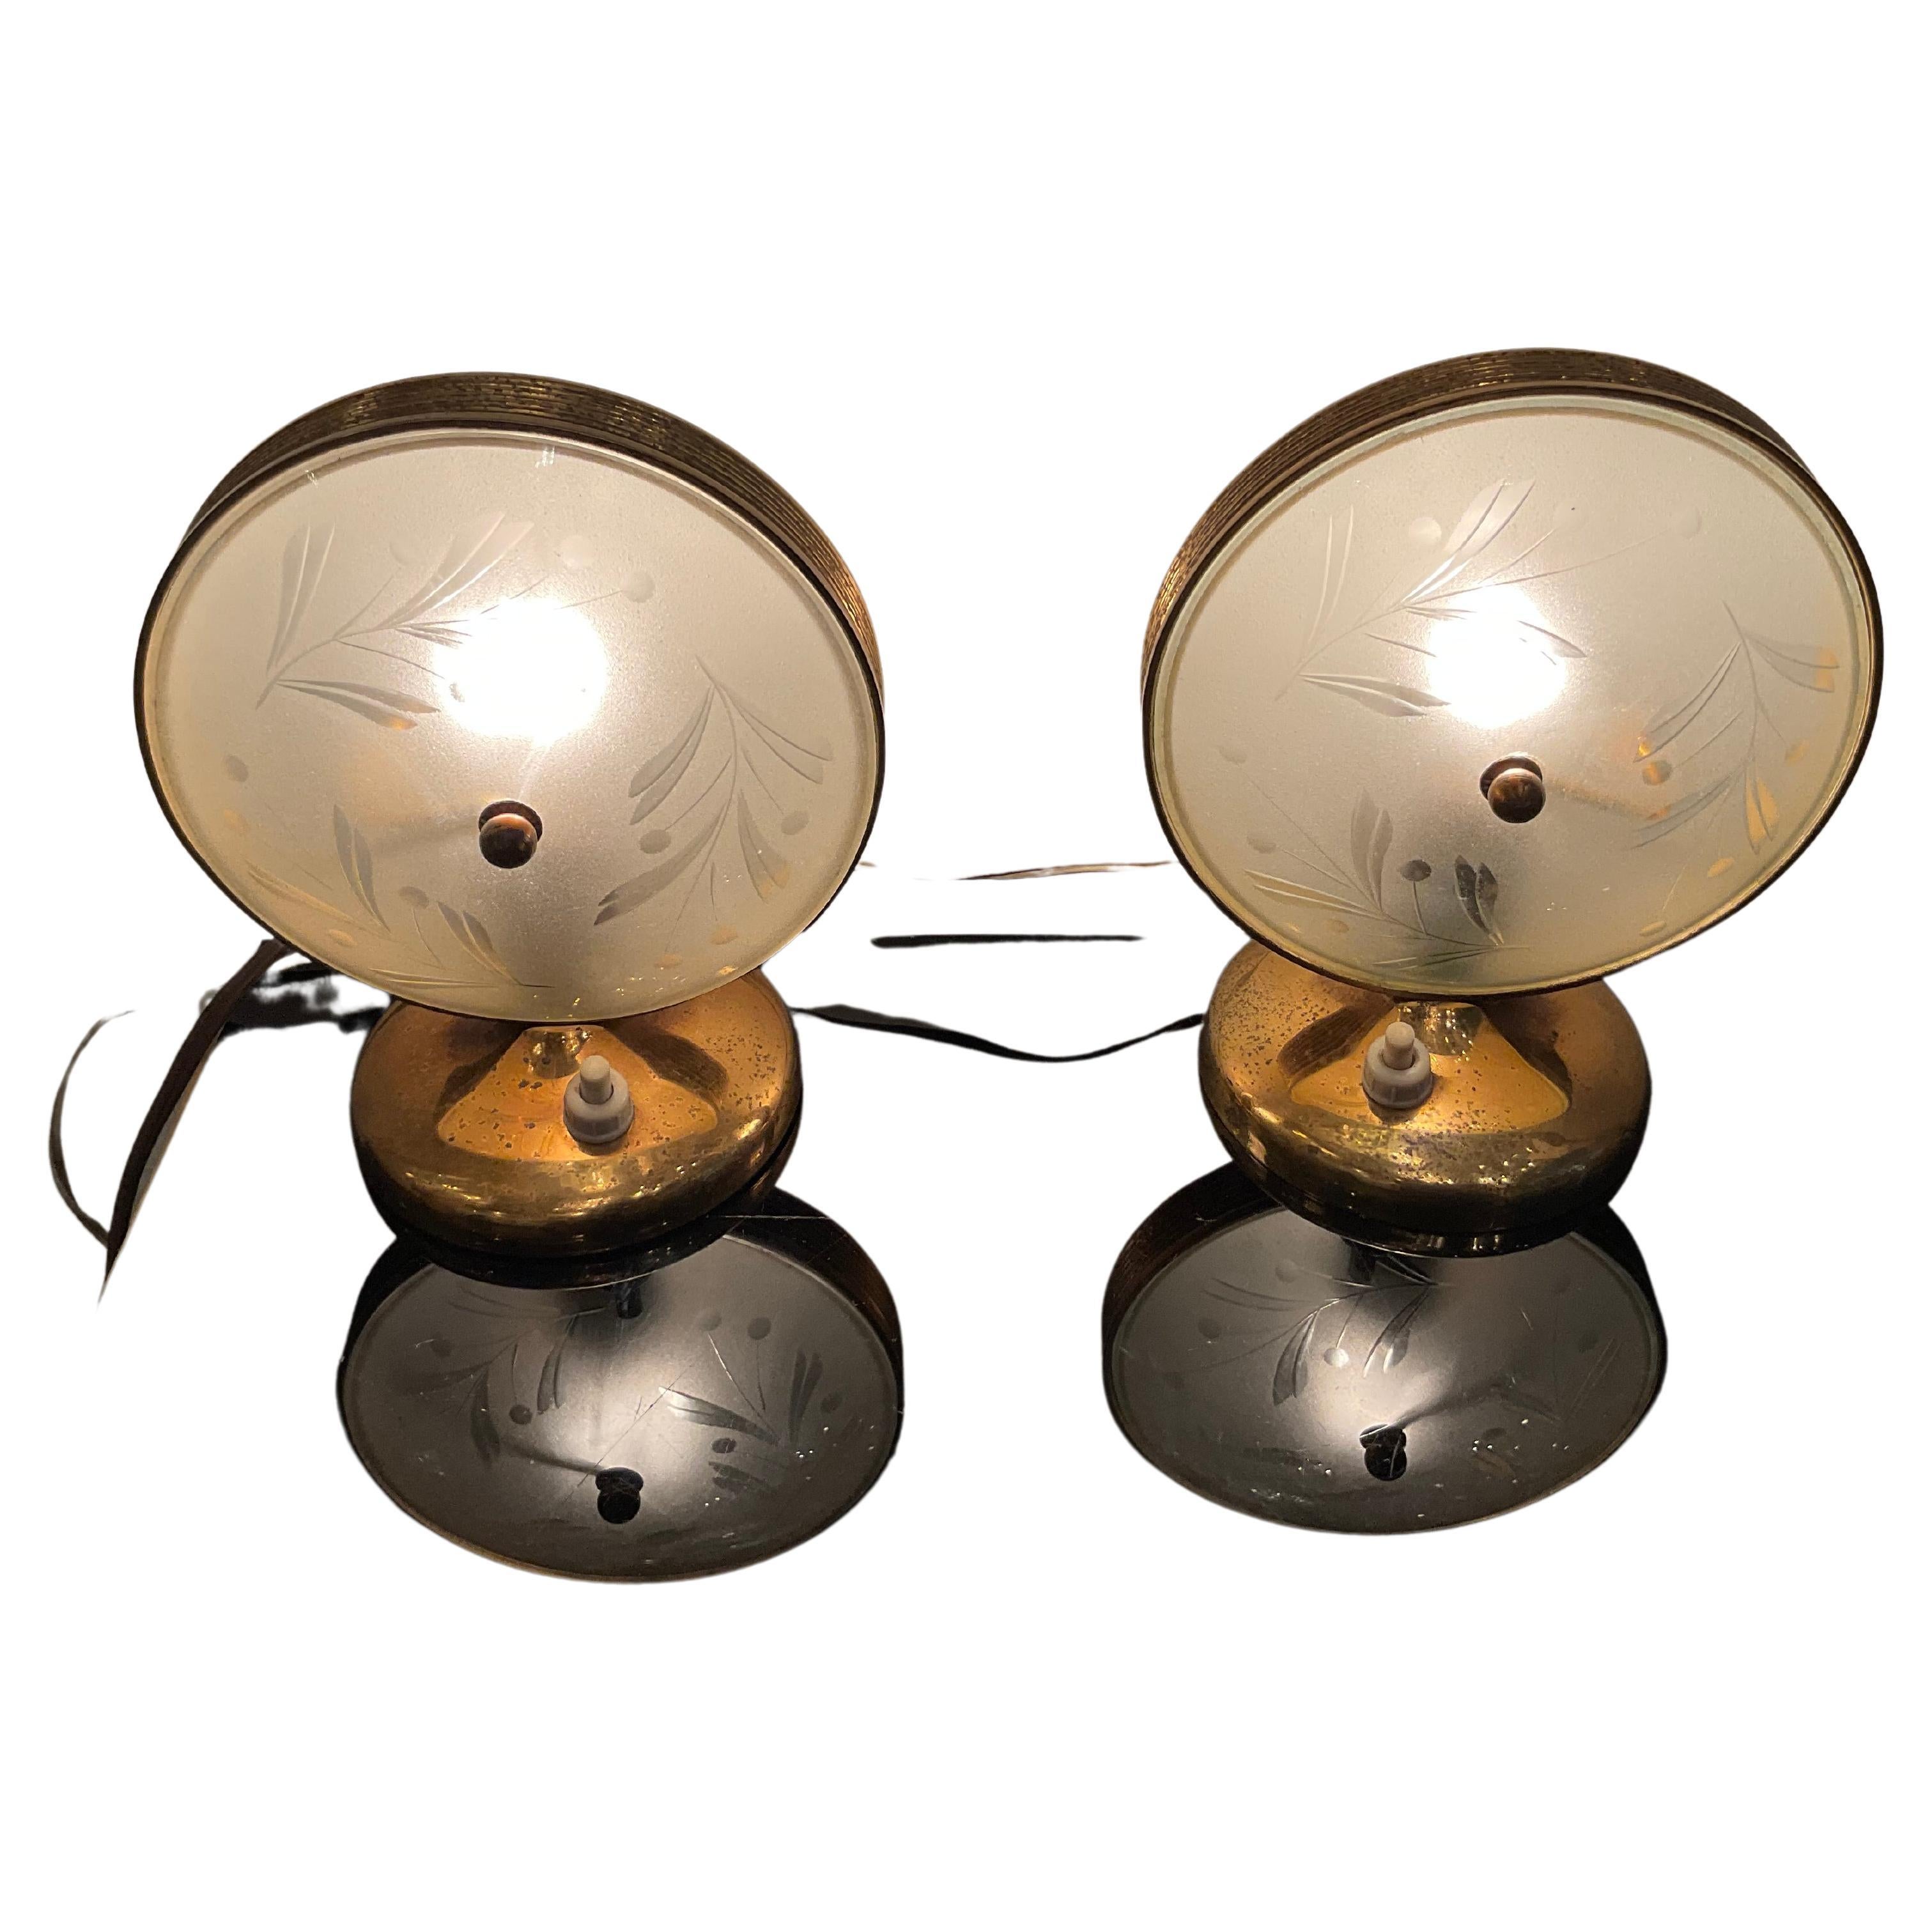 FONTANARTE - Pietro Chiesa - Pair of lamps 1950s For Sale